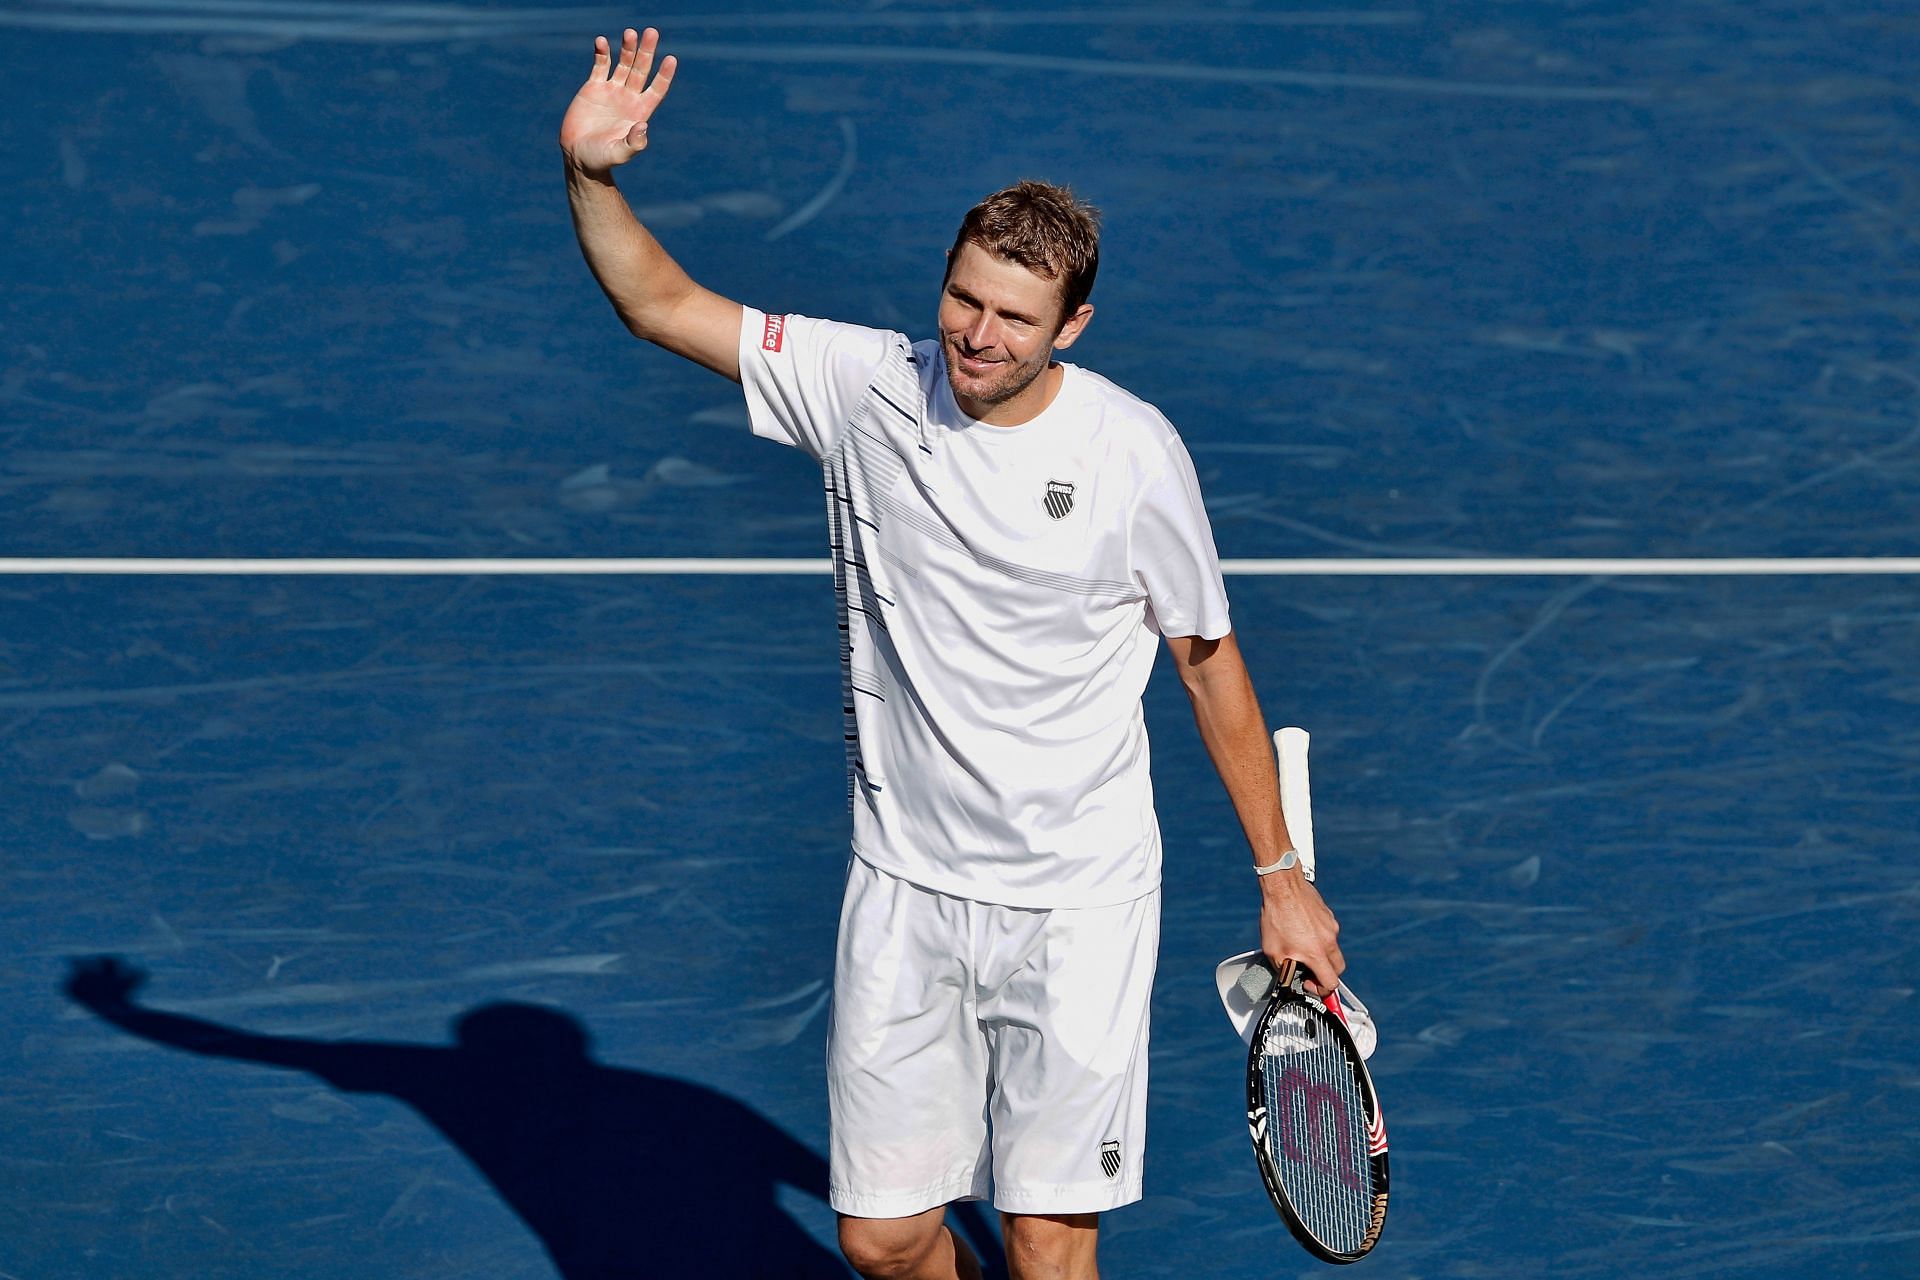 Mardy Fish broke into the top 10 for the first time at the age of 30